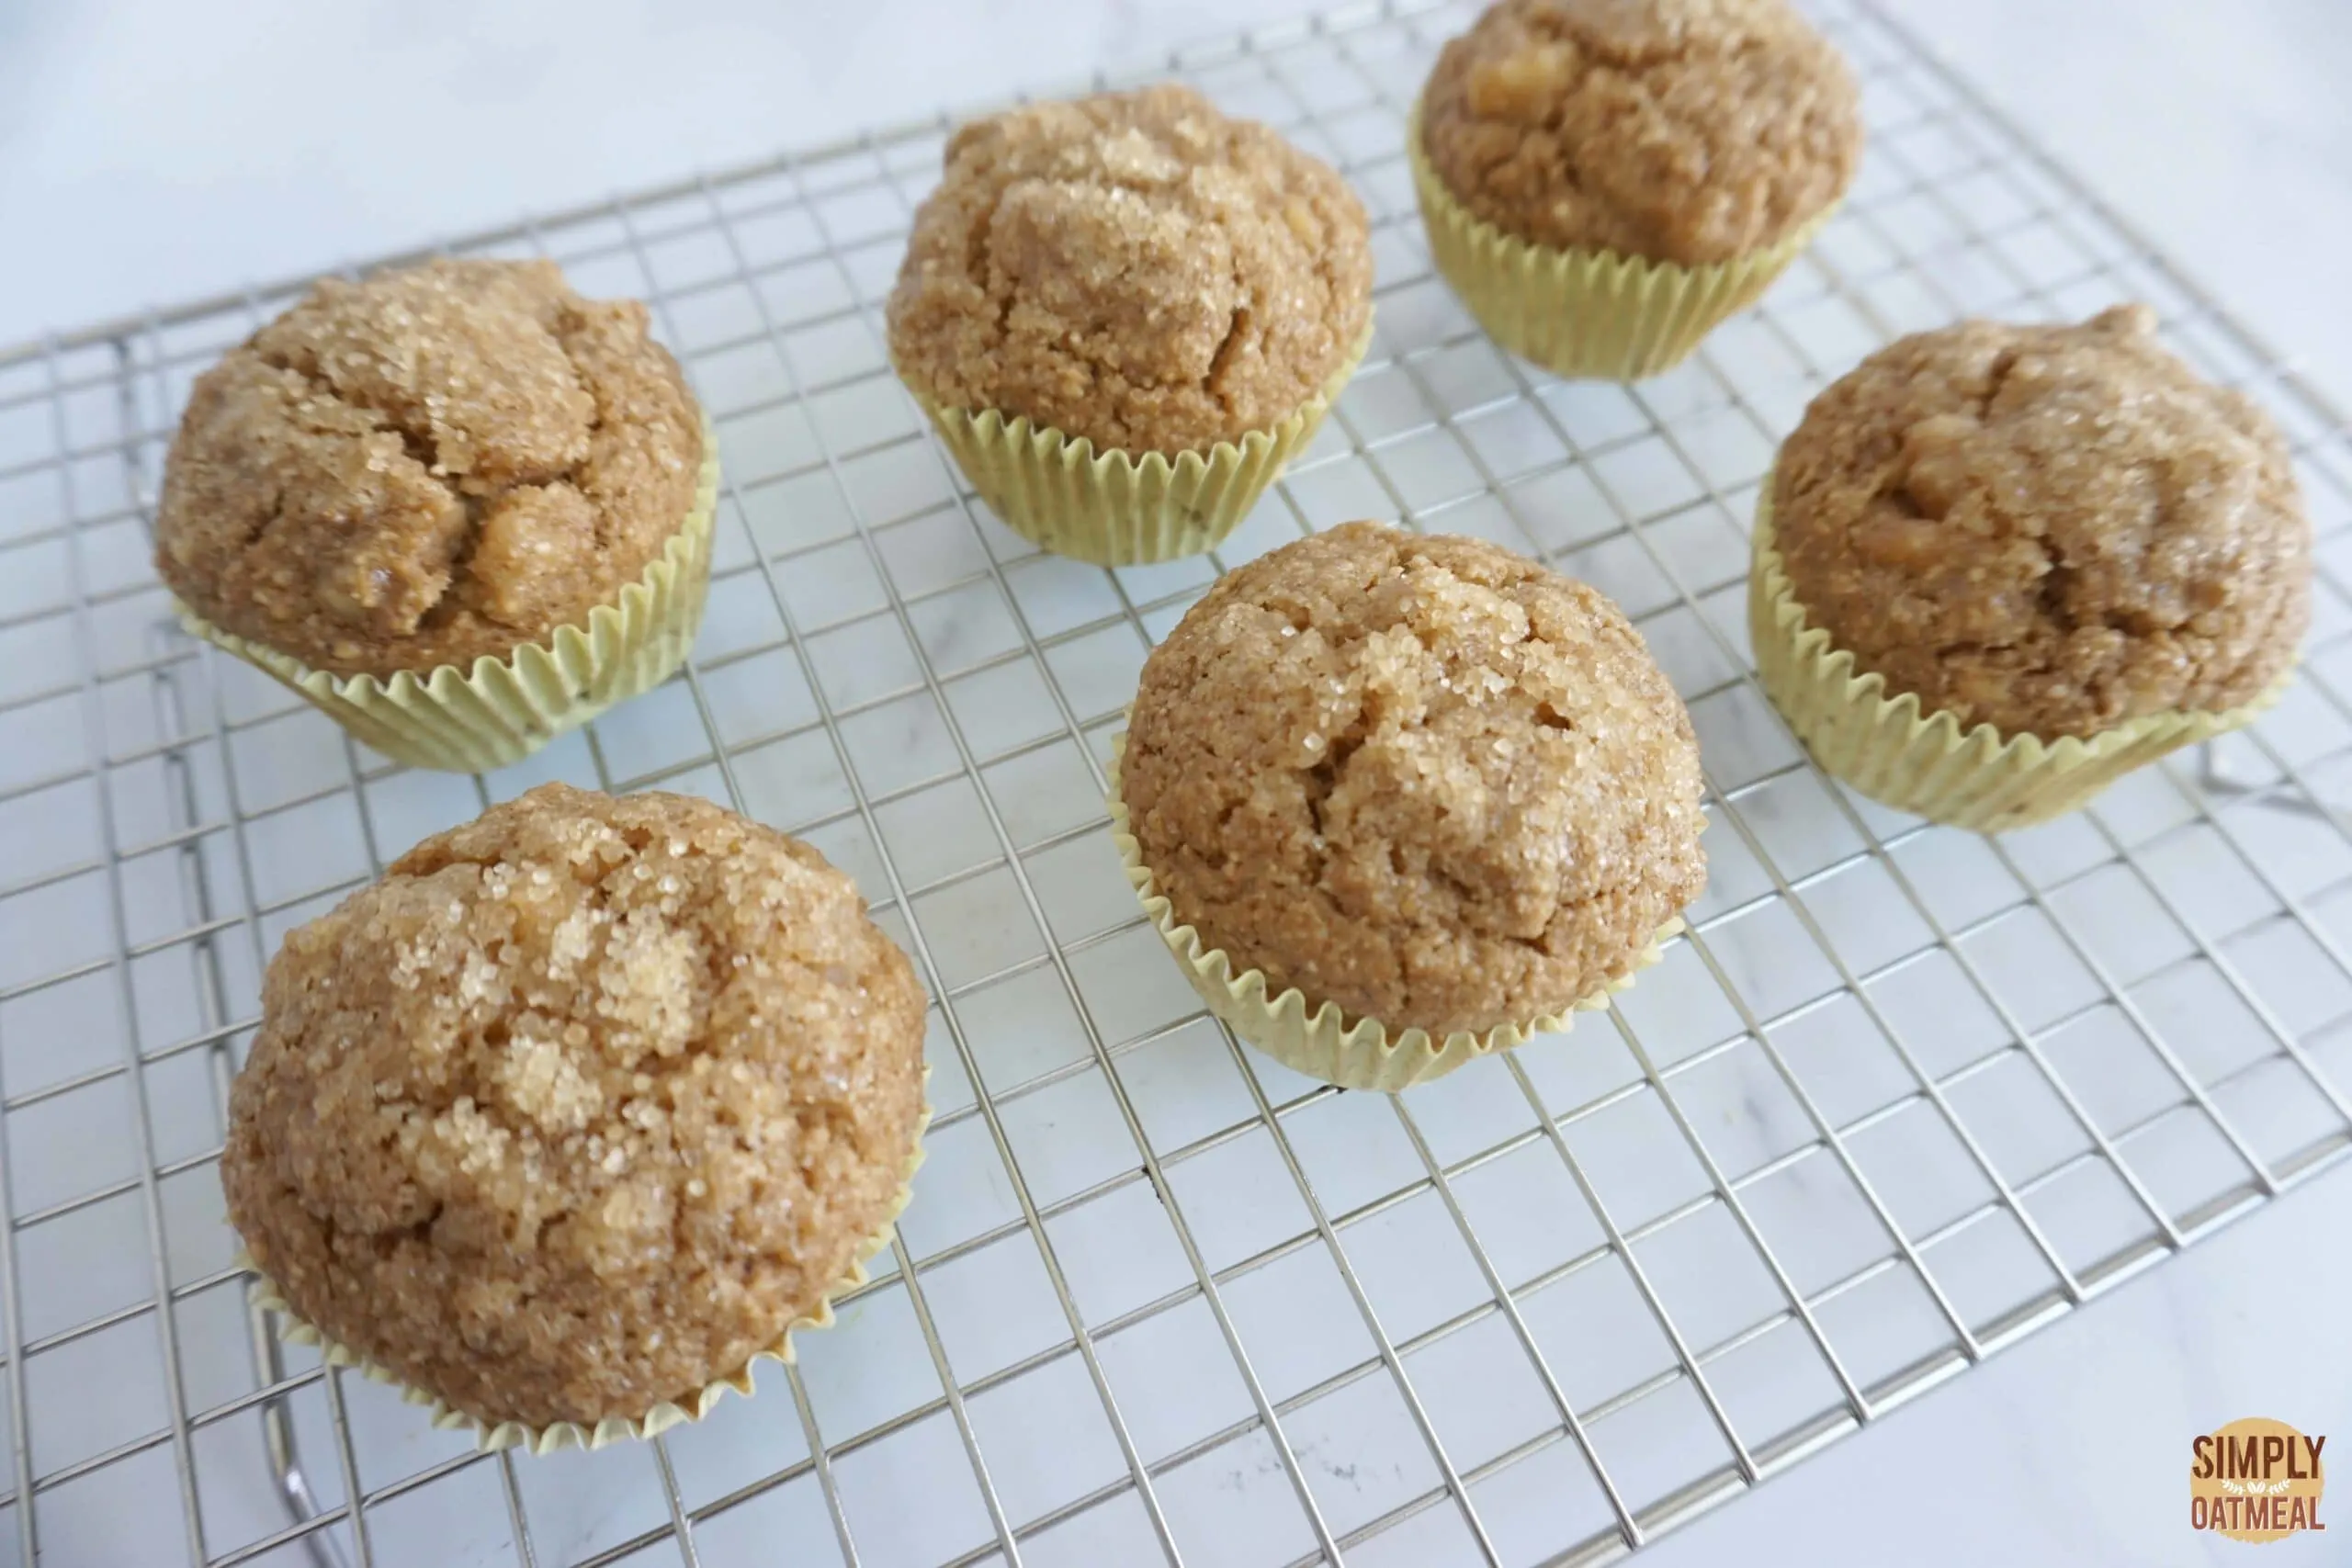 Vegan banana oatmeal muffins cooling on wire rack